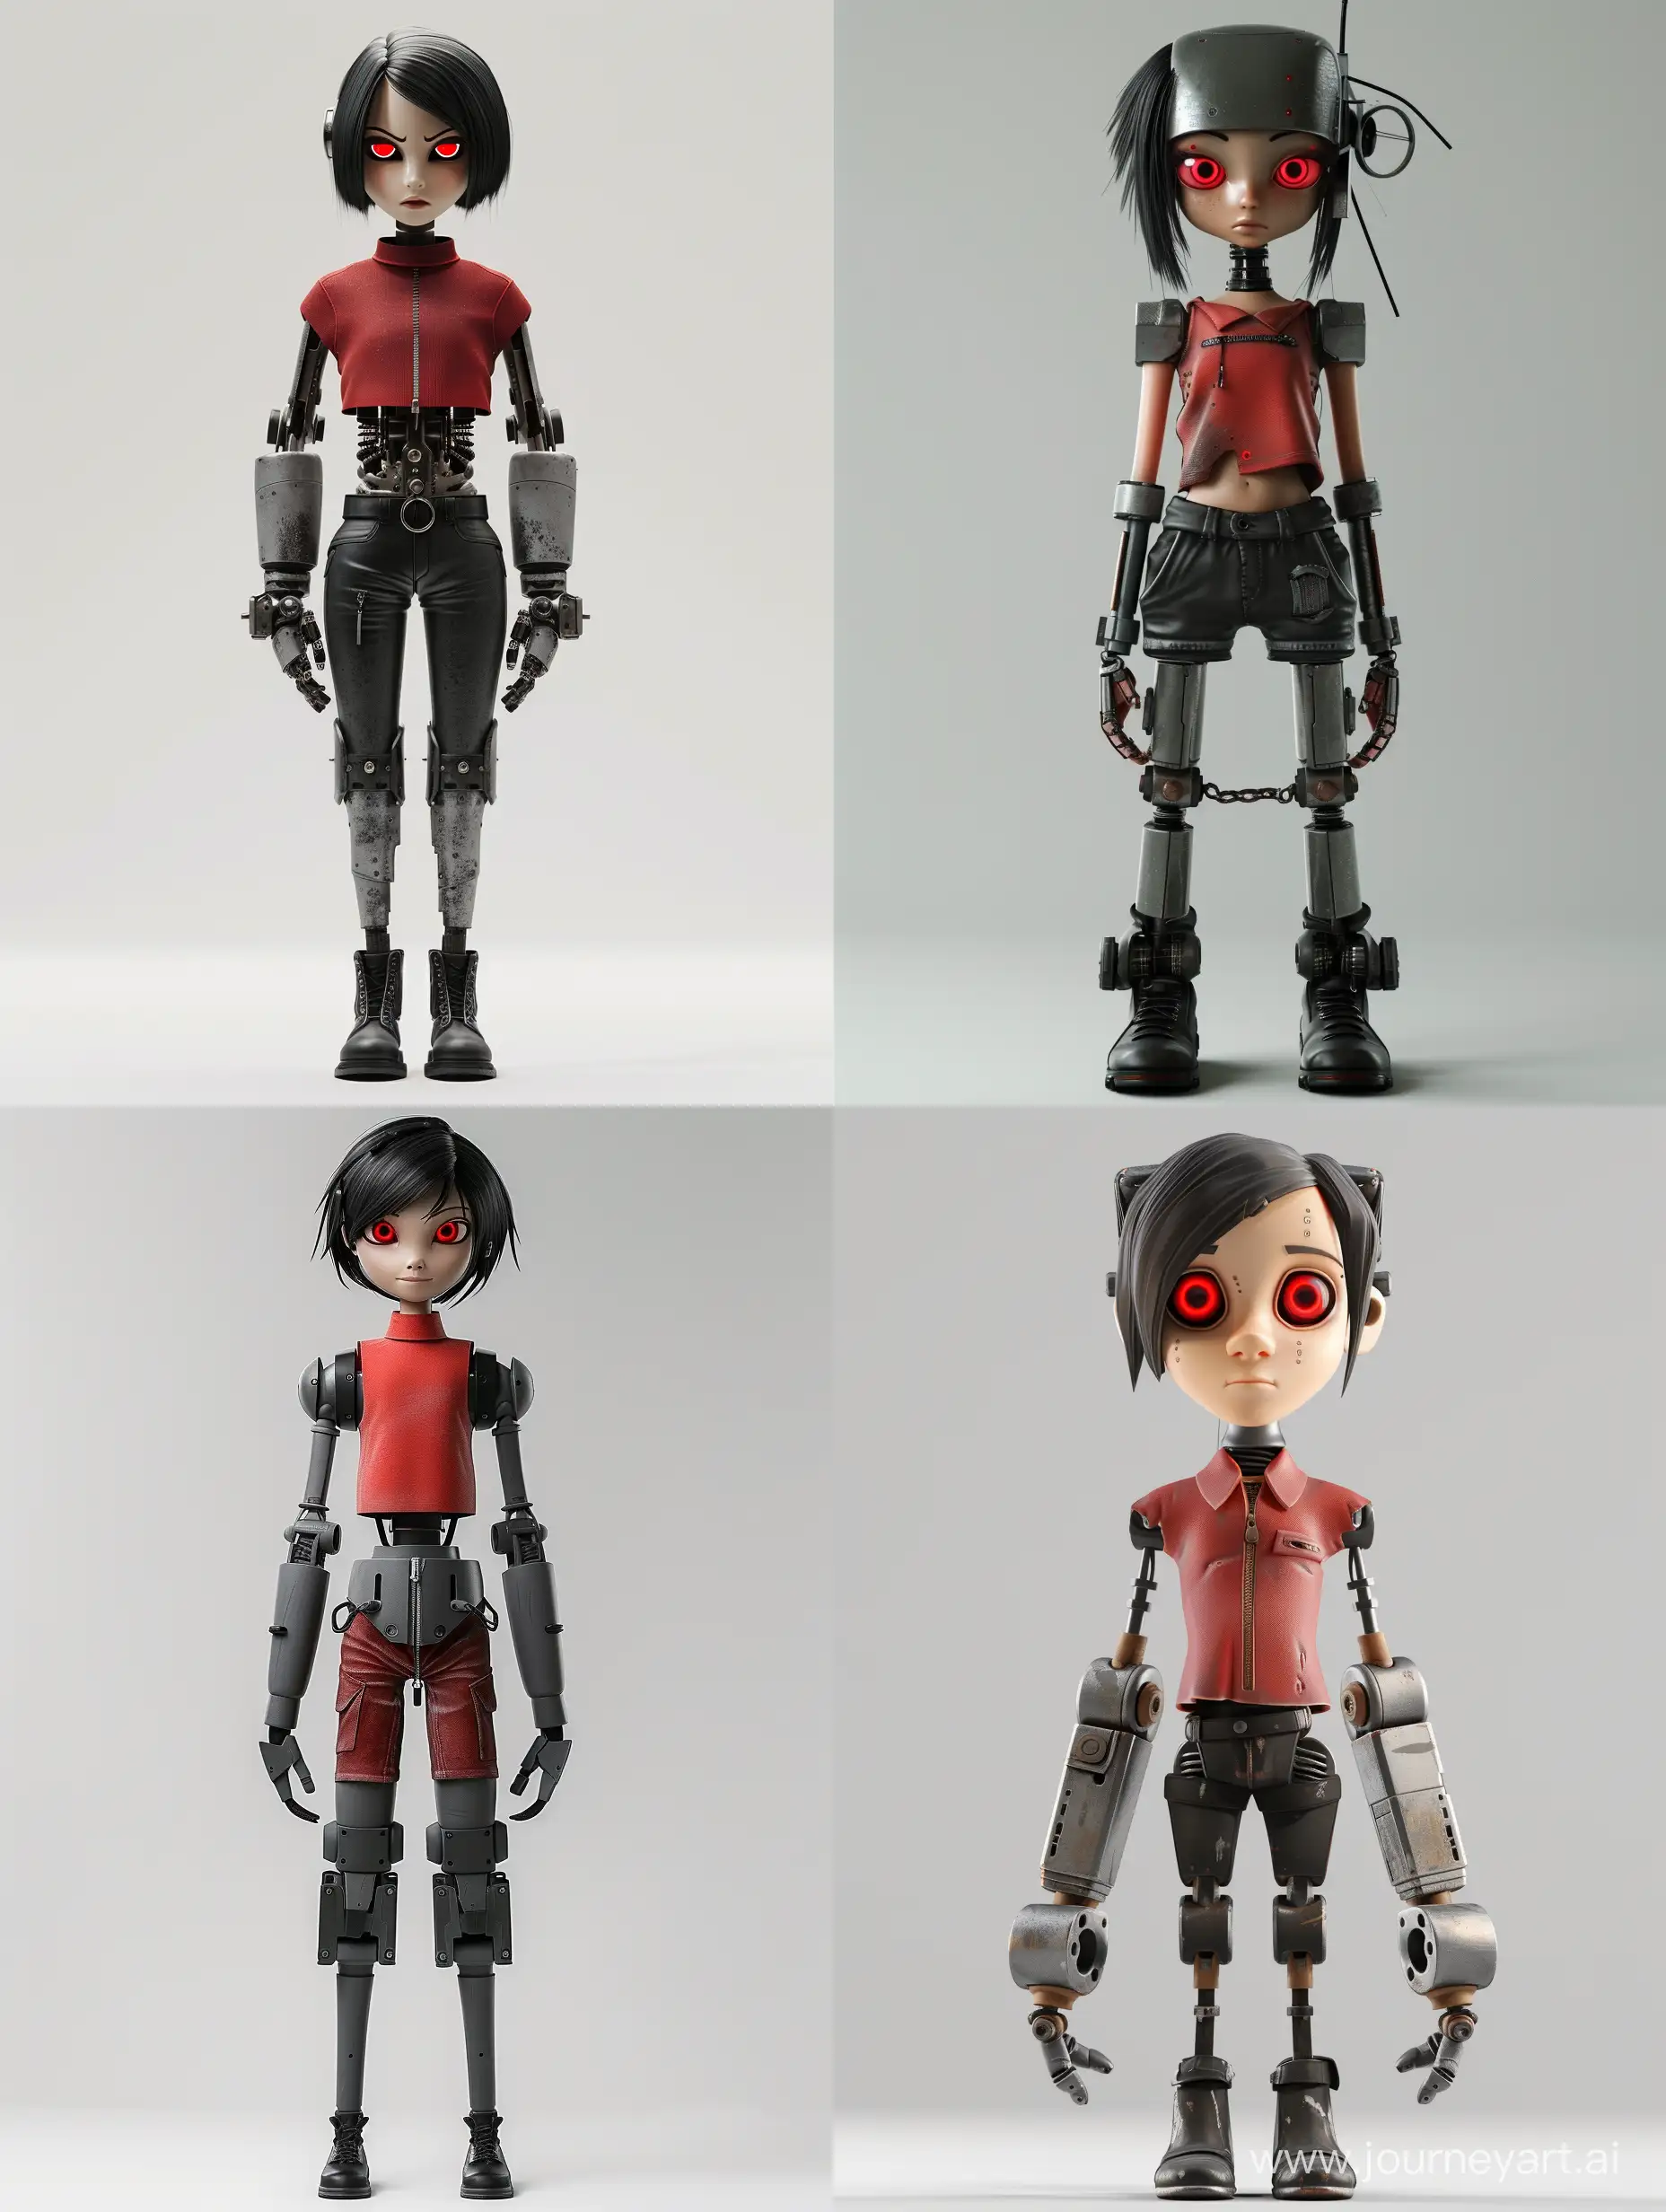 Futuristic-Girl-Robot-with-Red-Anime-Eyes-in-StandUp-Collar-Shirt-and-Black-Cargo-Pants